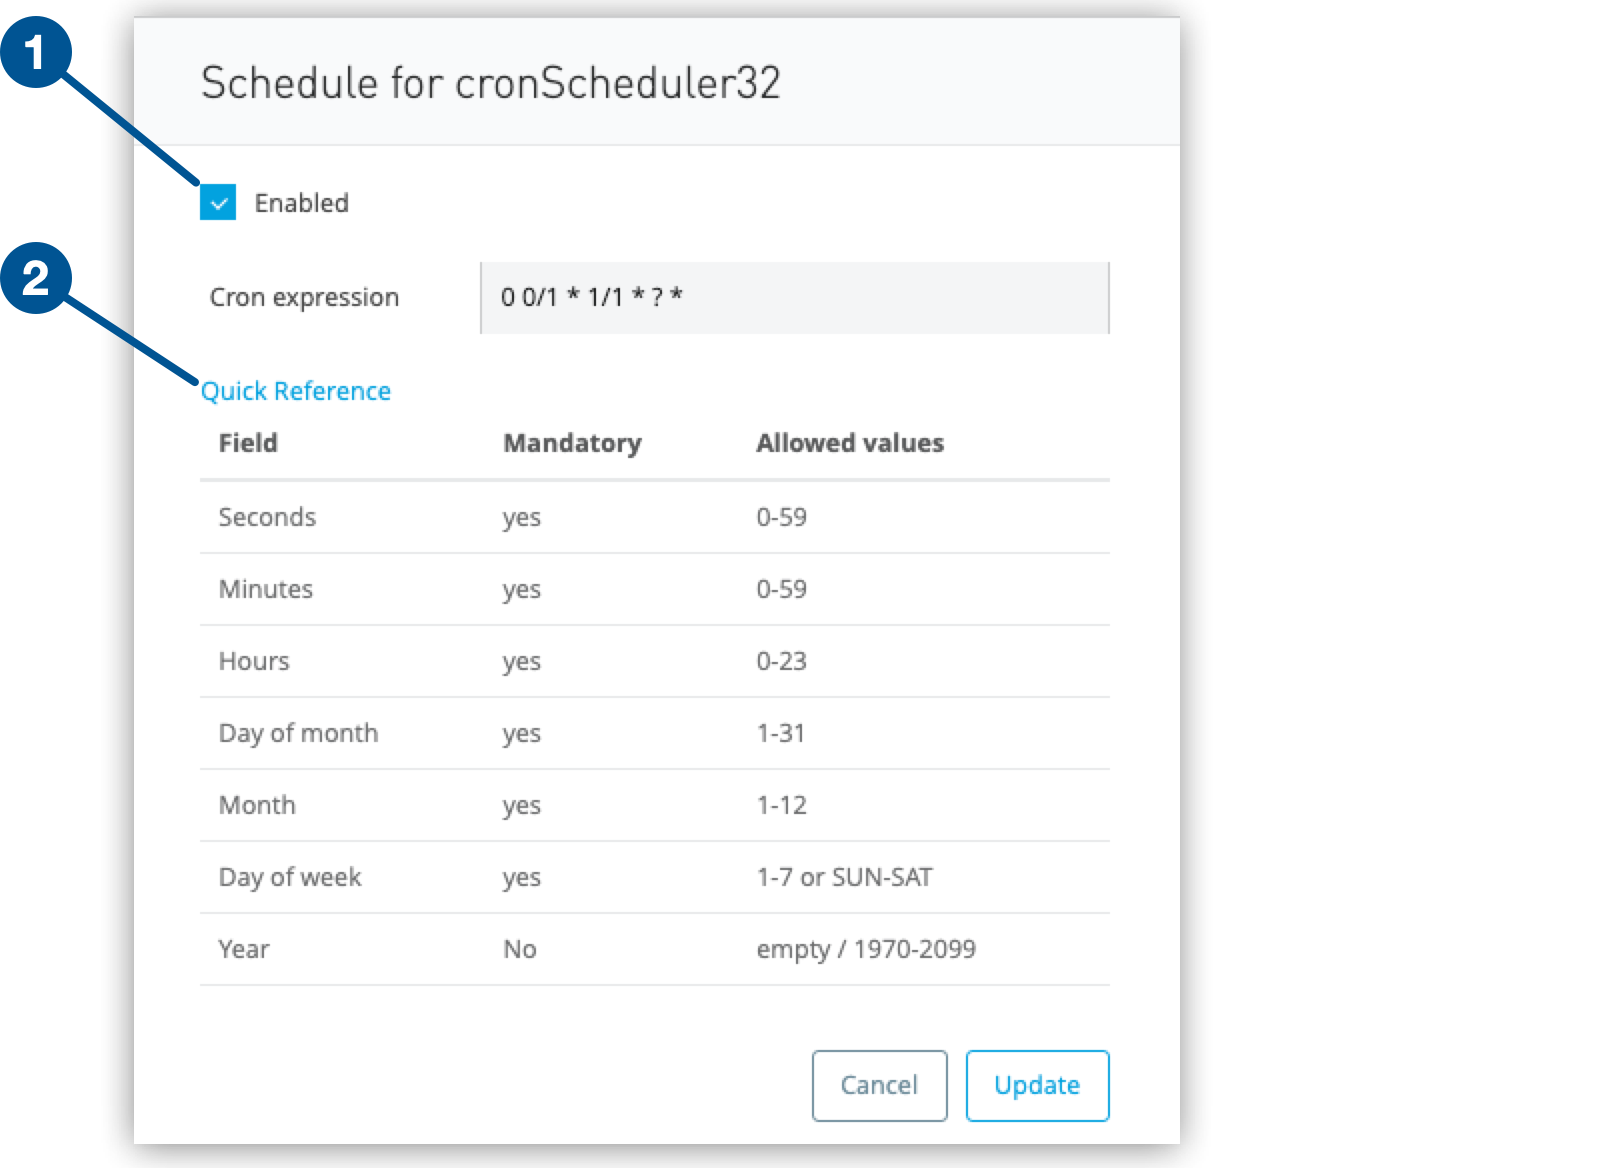 cron schedule configuration with (1) Enabled option and (2)  Quick Reference link